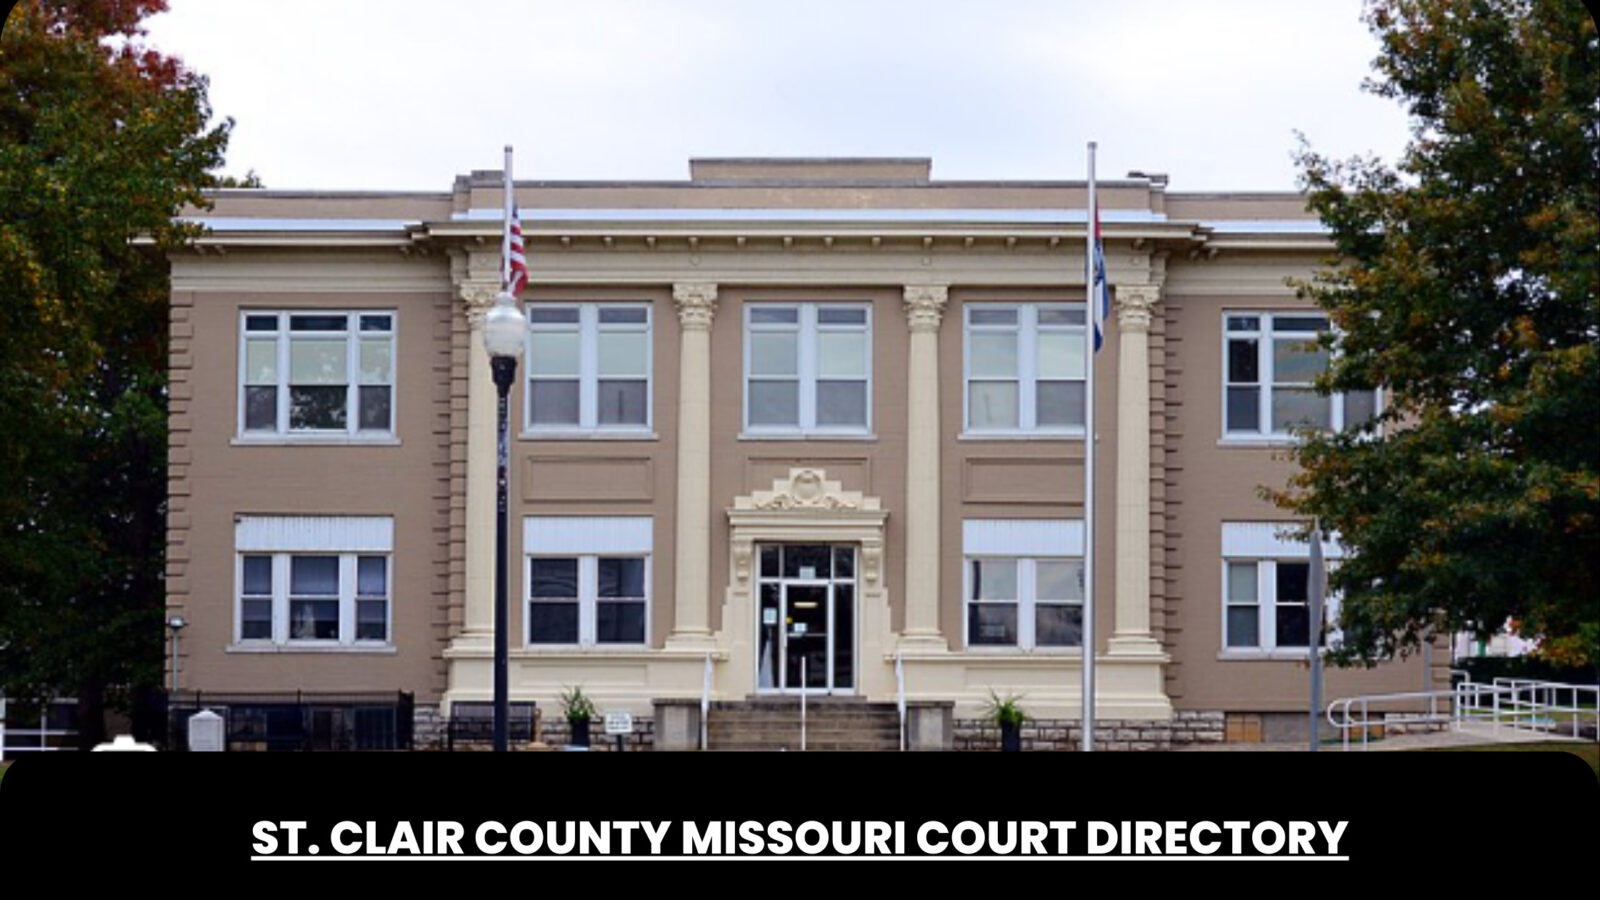 St. Clair County Missouri Court Directory